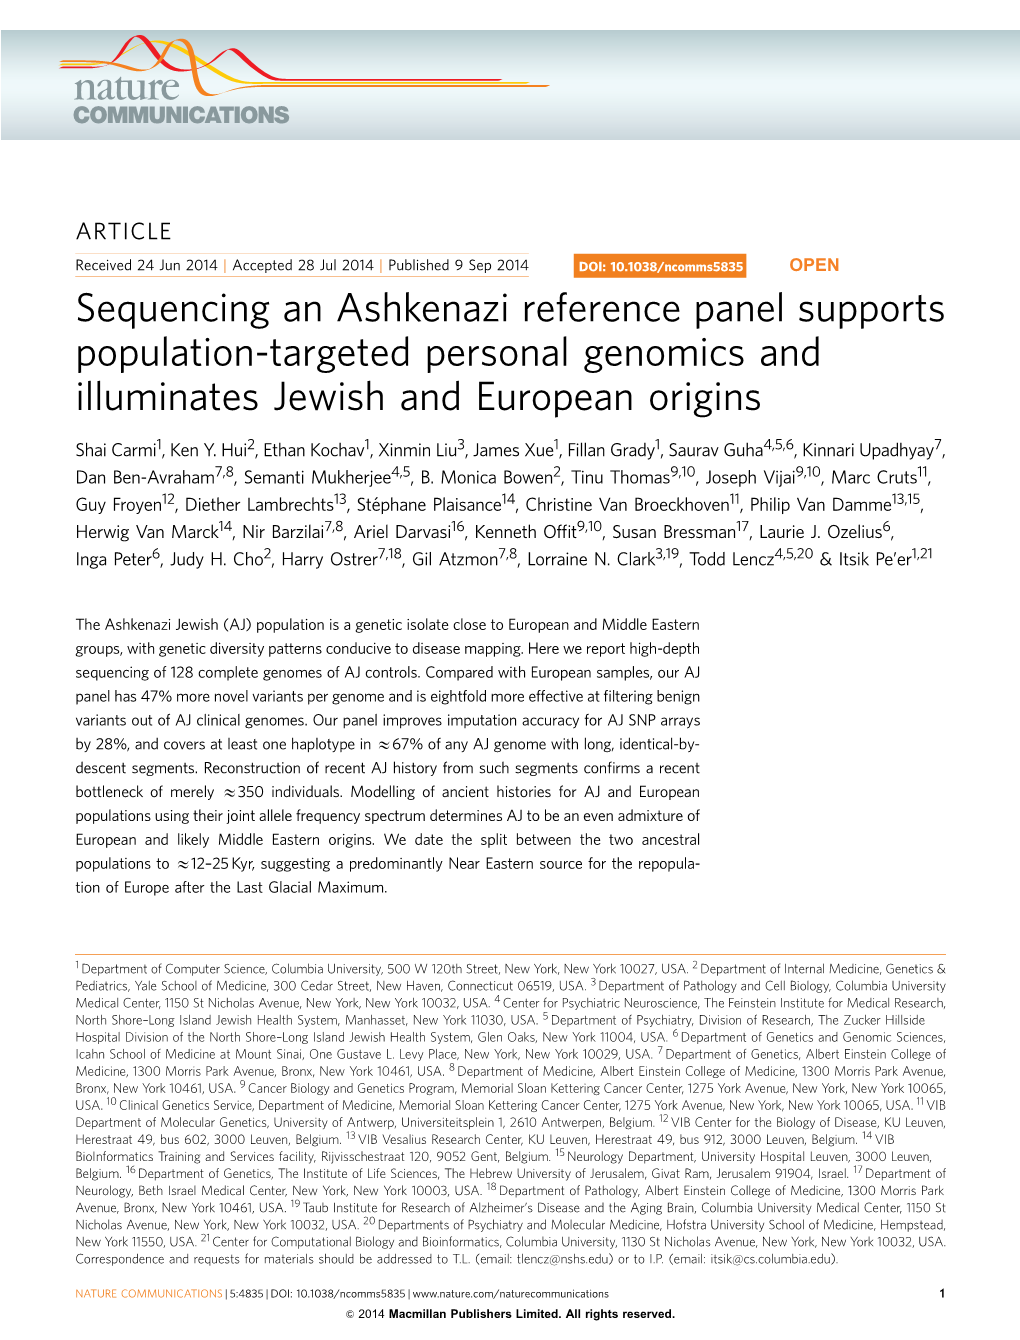 Sequencing an Ashkenazi Reference Panel Supports Population-Targeted Personal Genomics and Illuminates Jewish and European Origins